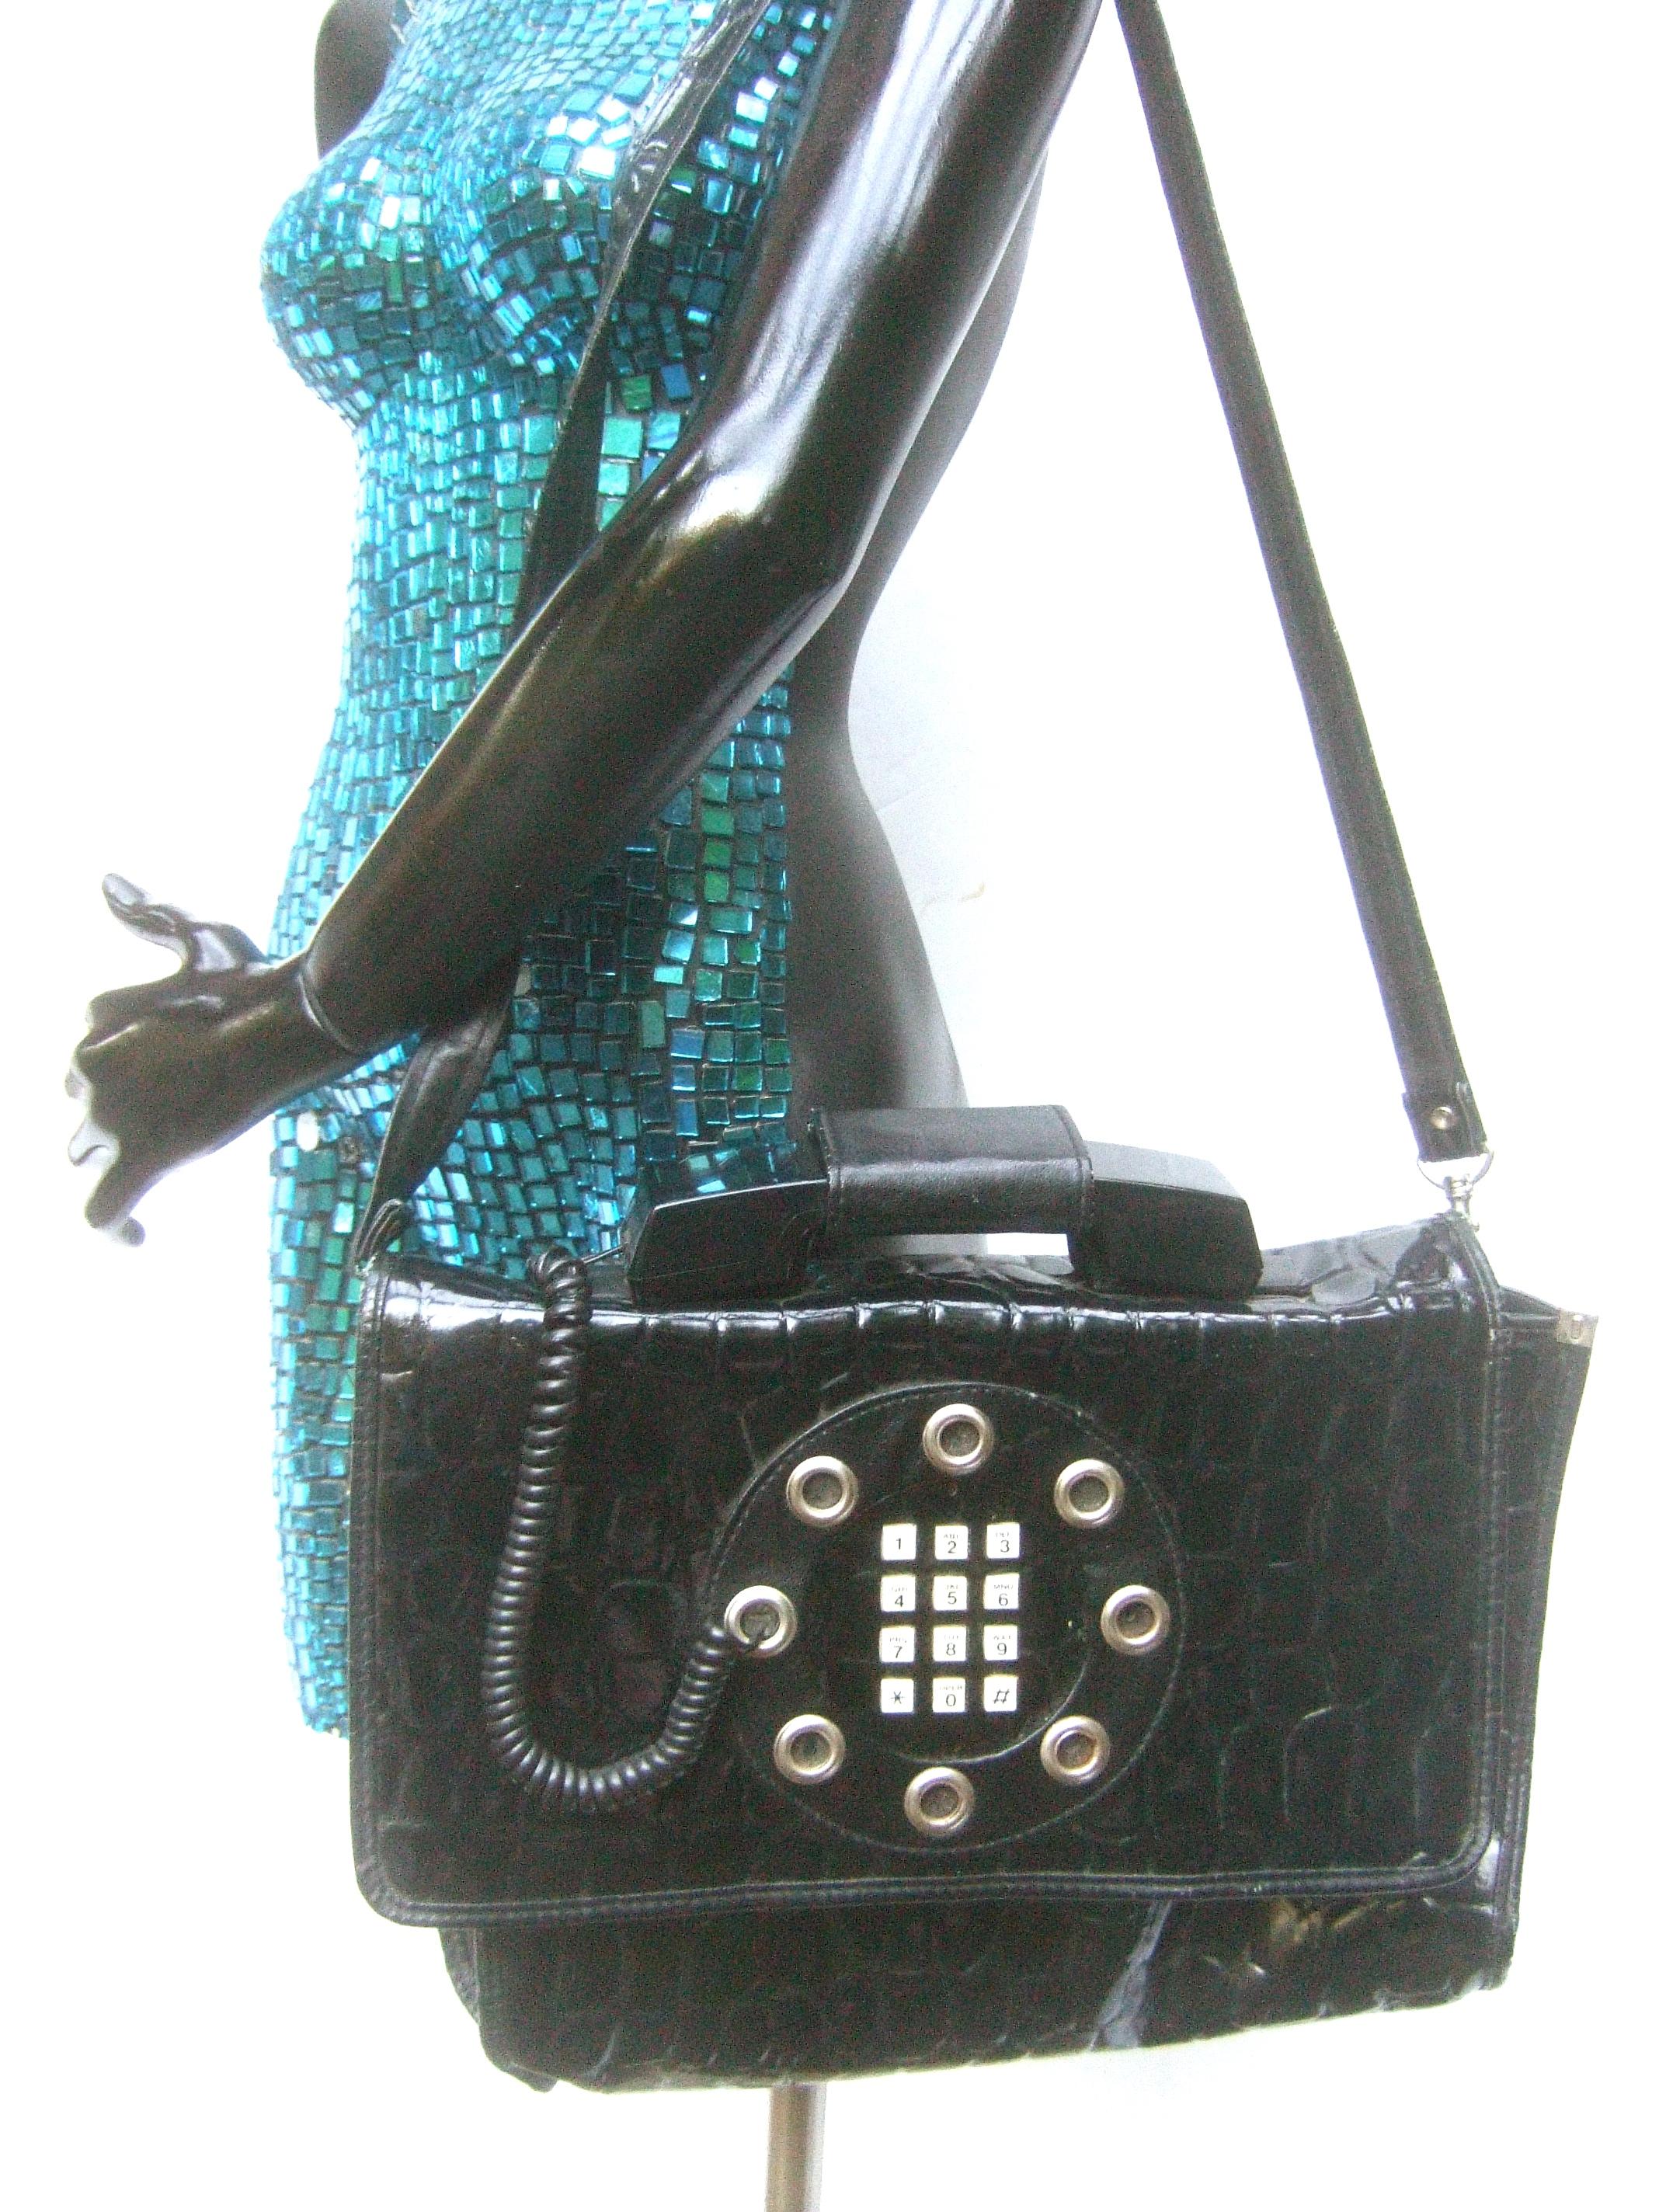 Mod avant-garde embossed black vinyl large shoulder bag c 1980s
The large scale embossed vinyl attache style bag is designed with a telephone receiver on top that serves as the handle. The front exterior has a push-button numerical telephone key pad